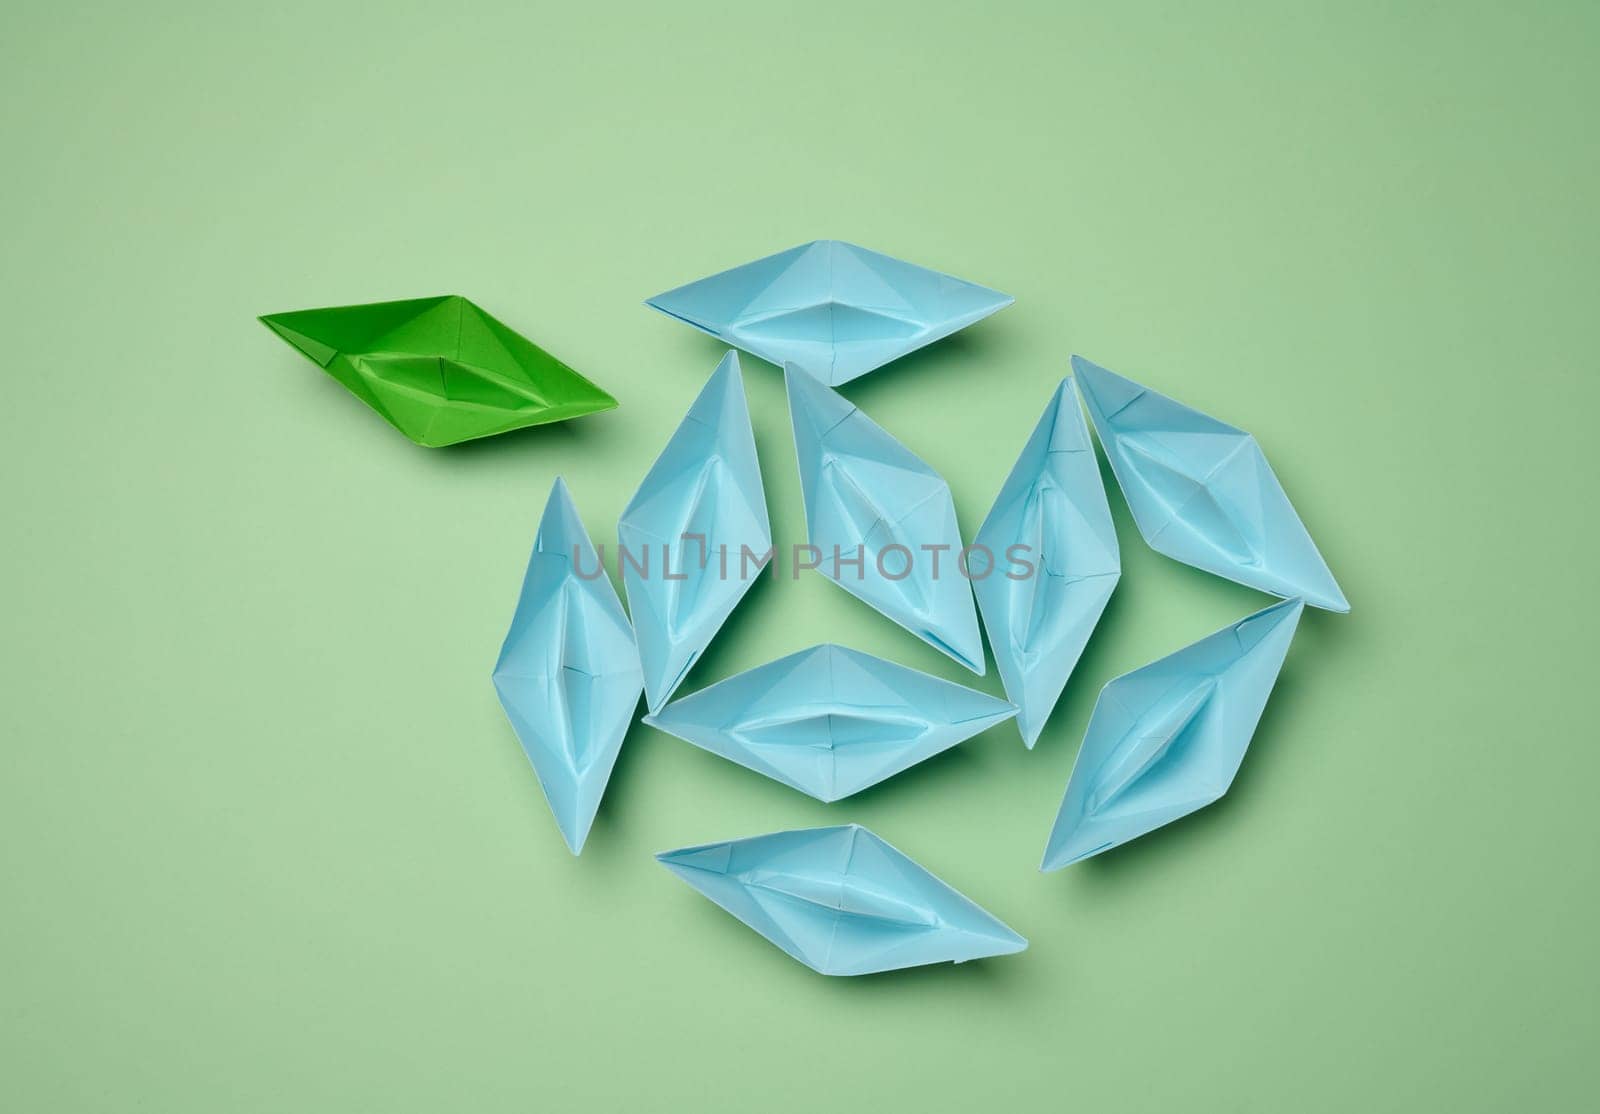 Group of blue paper boats heading in one direction and one green one heading in the opposite direction by ndanko